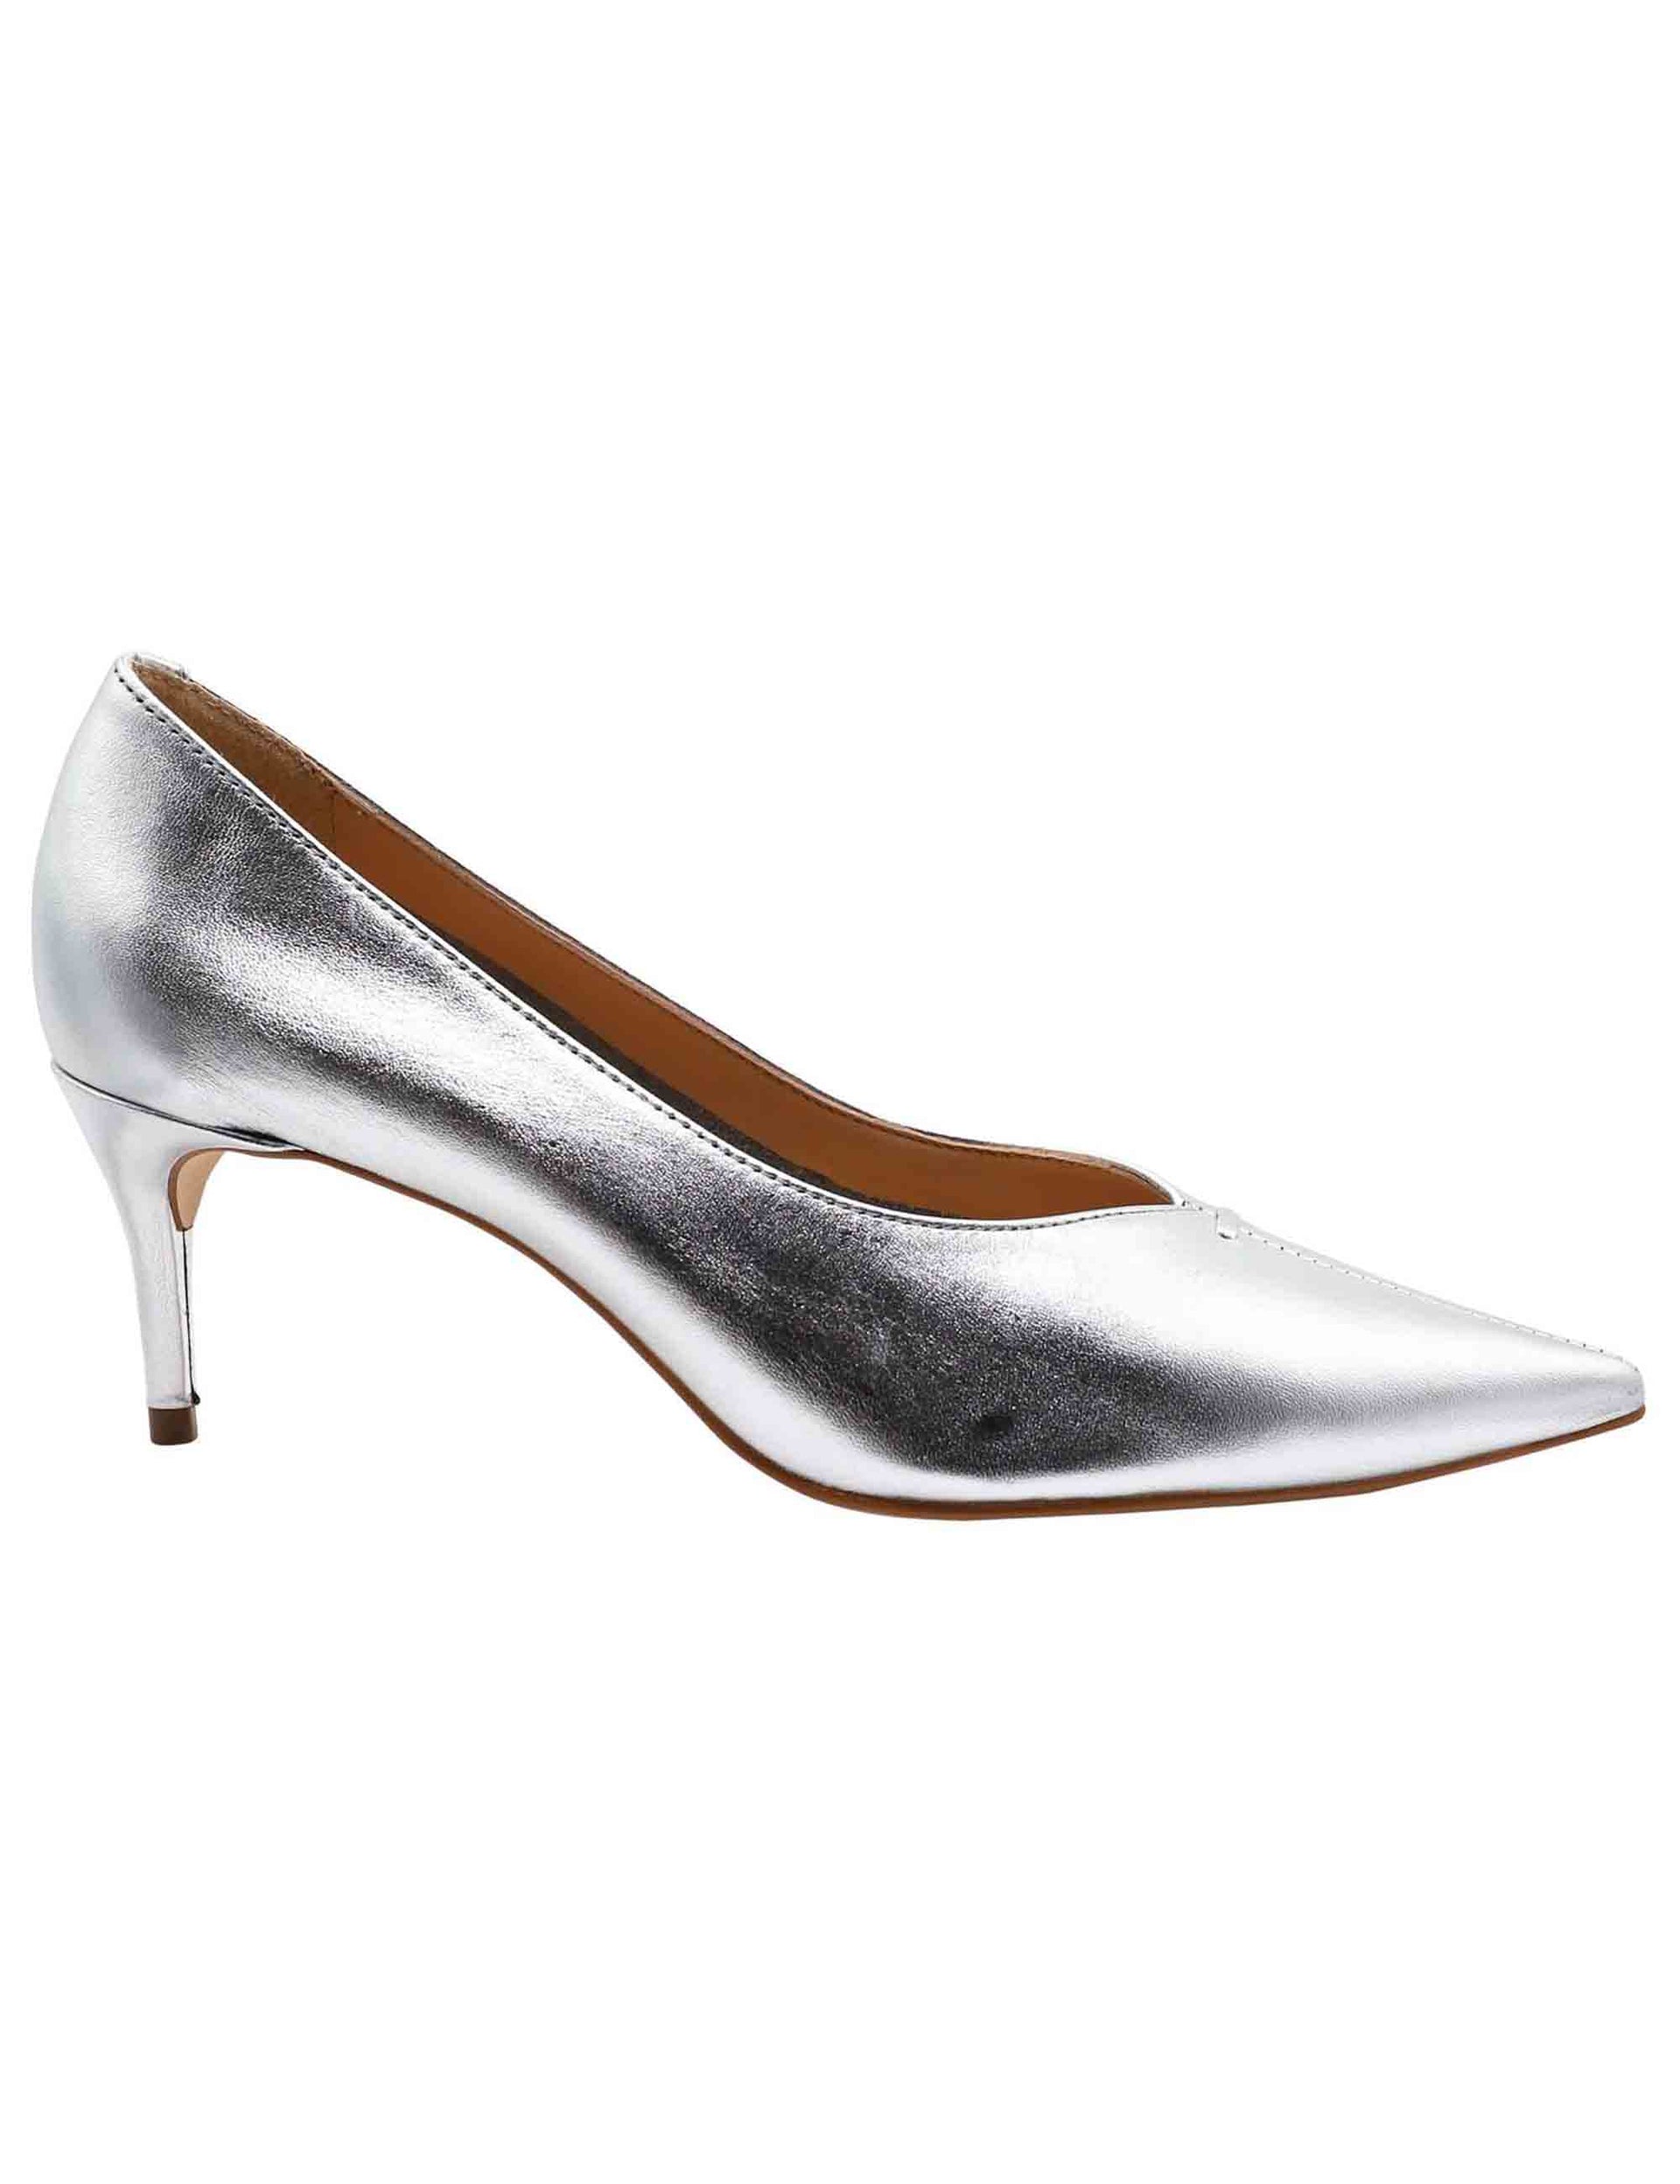 Women's high-top pumps made of silver leather with medium heel and pointed toe